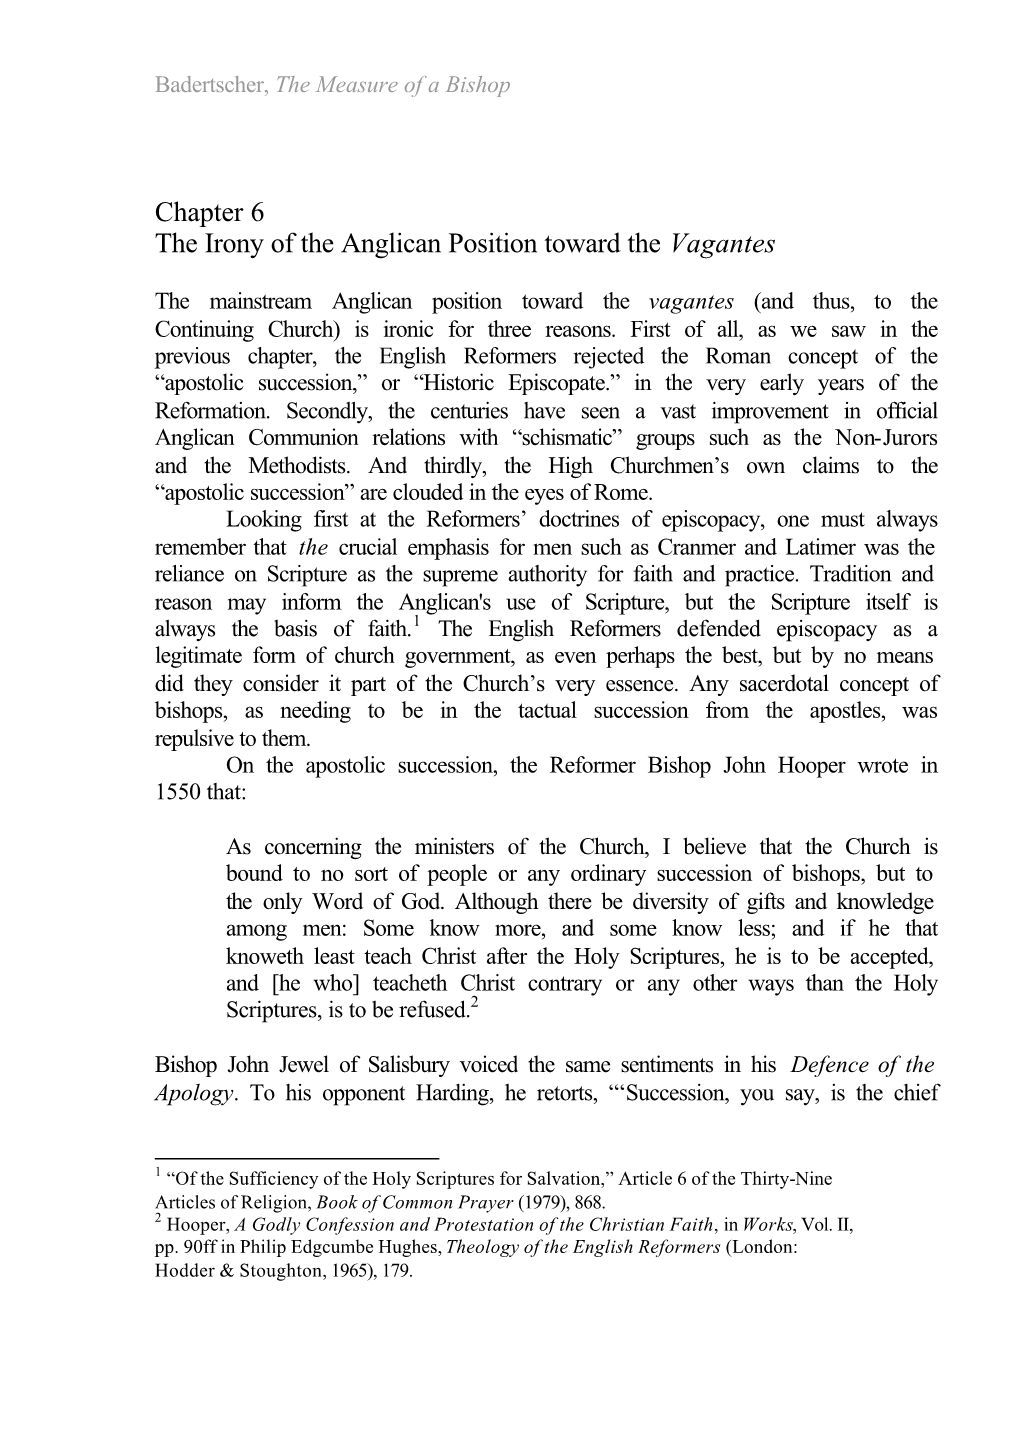 Chapter 6 the Irony of the Anglican Position Toward the Vagantes